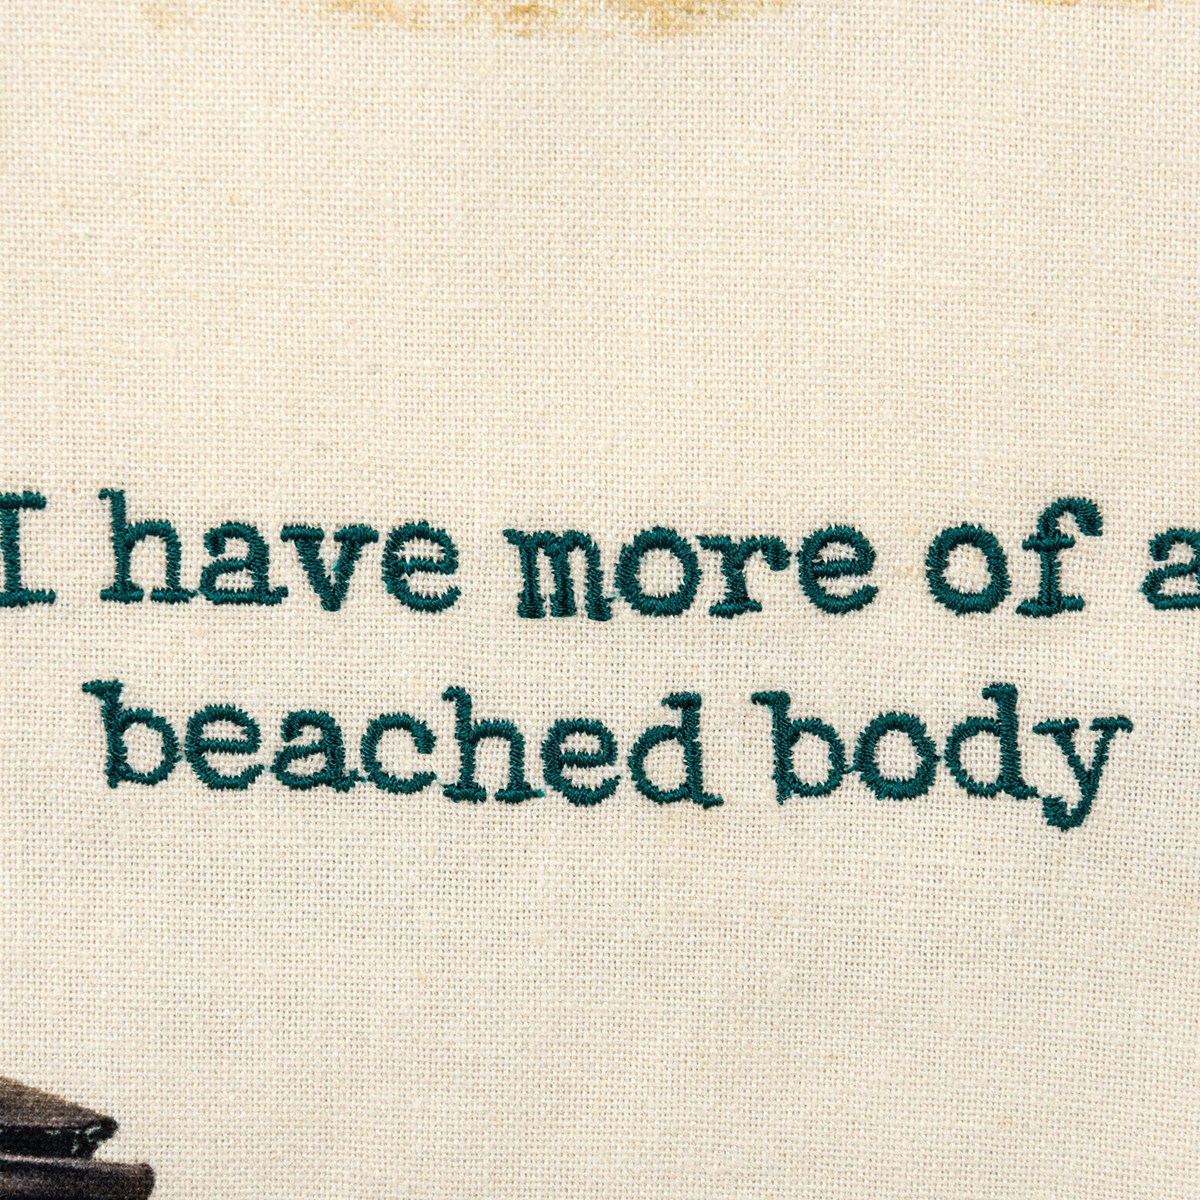 I Have More Of A Beached Body Kitchen Towel - Cotton, Linen